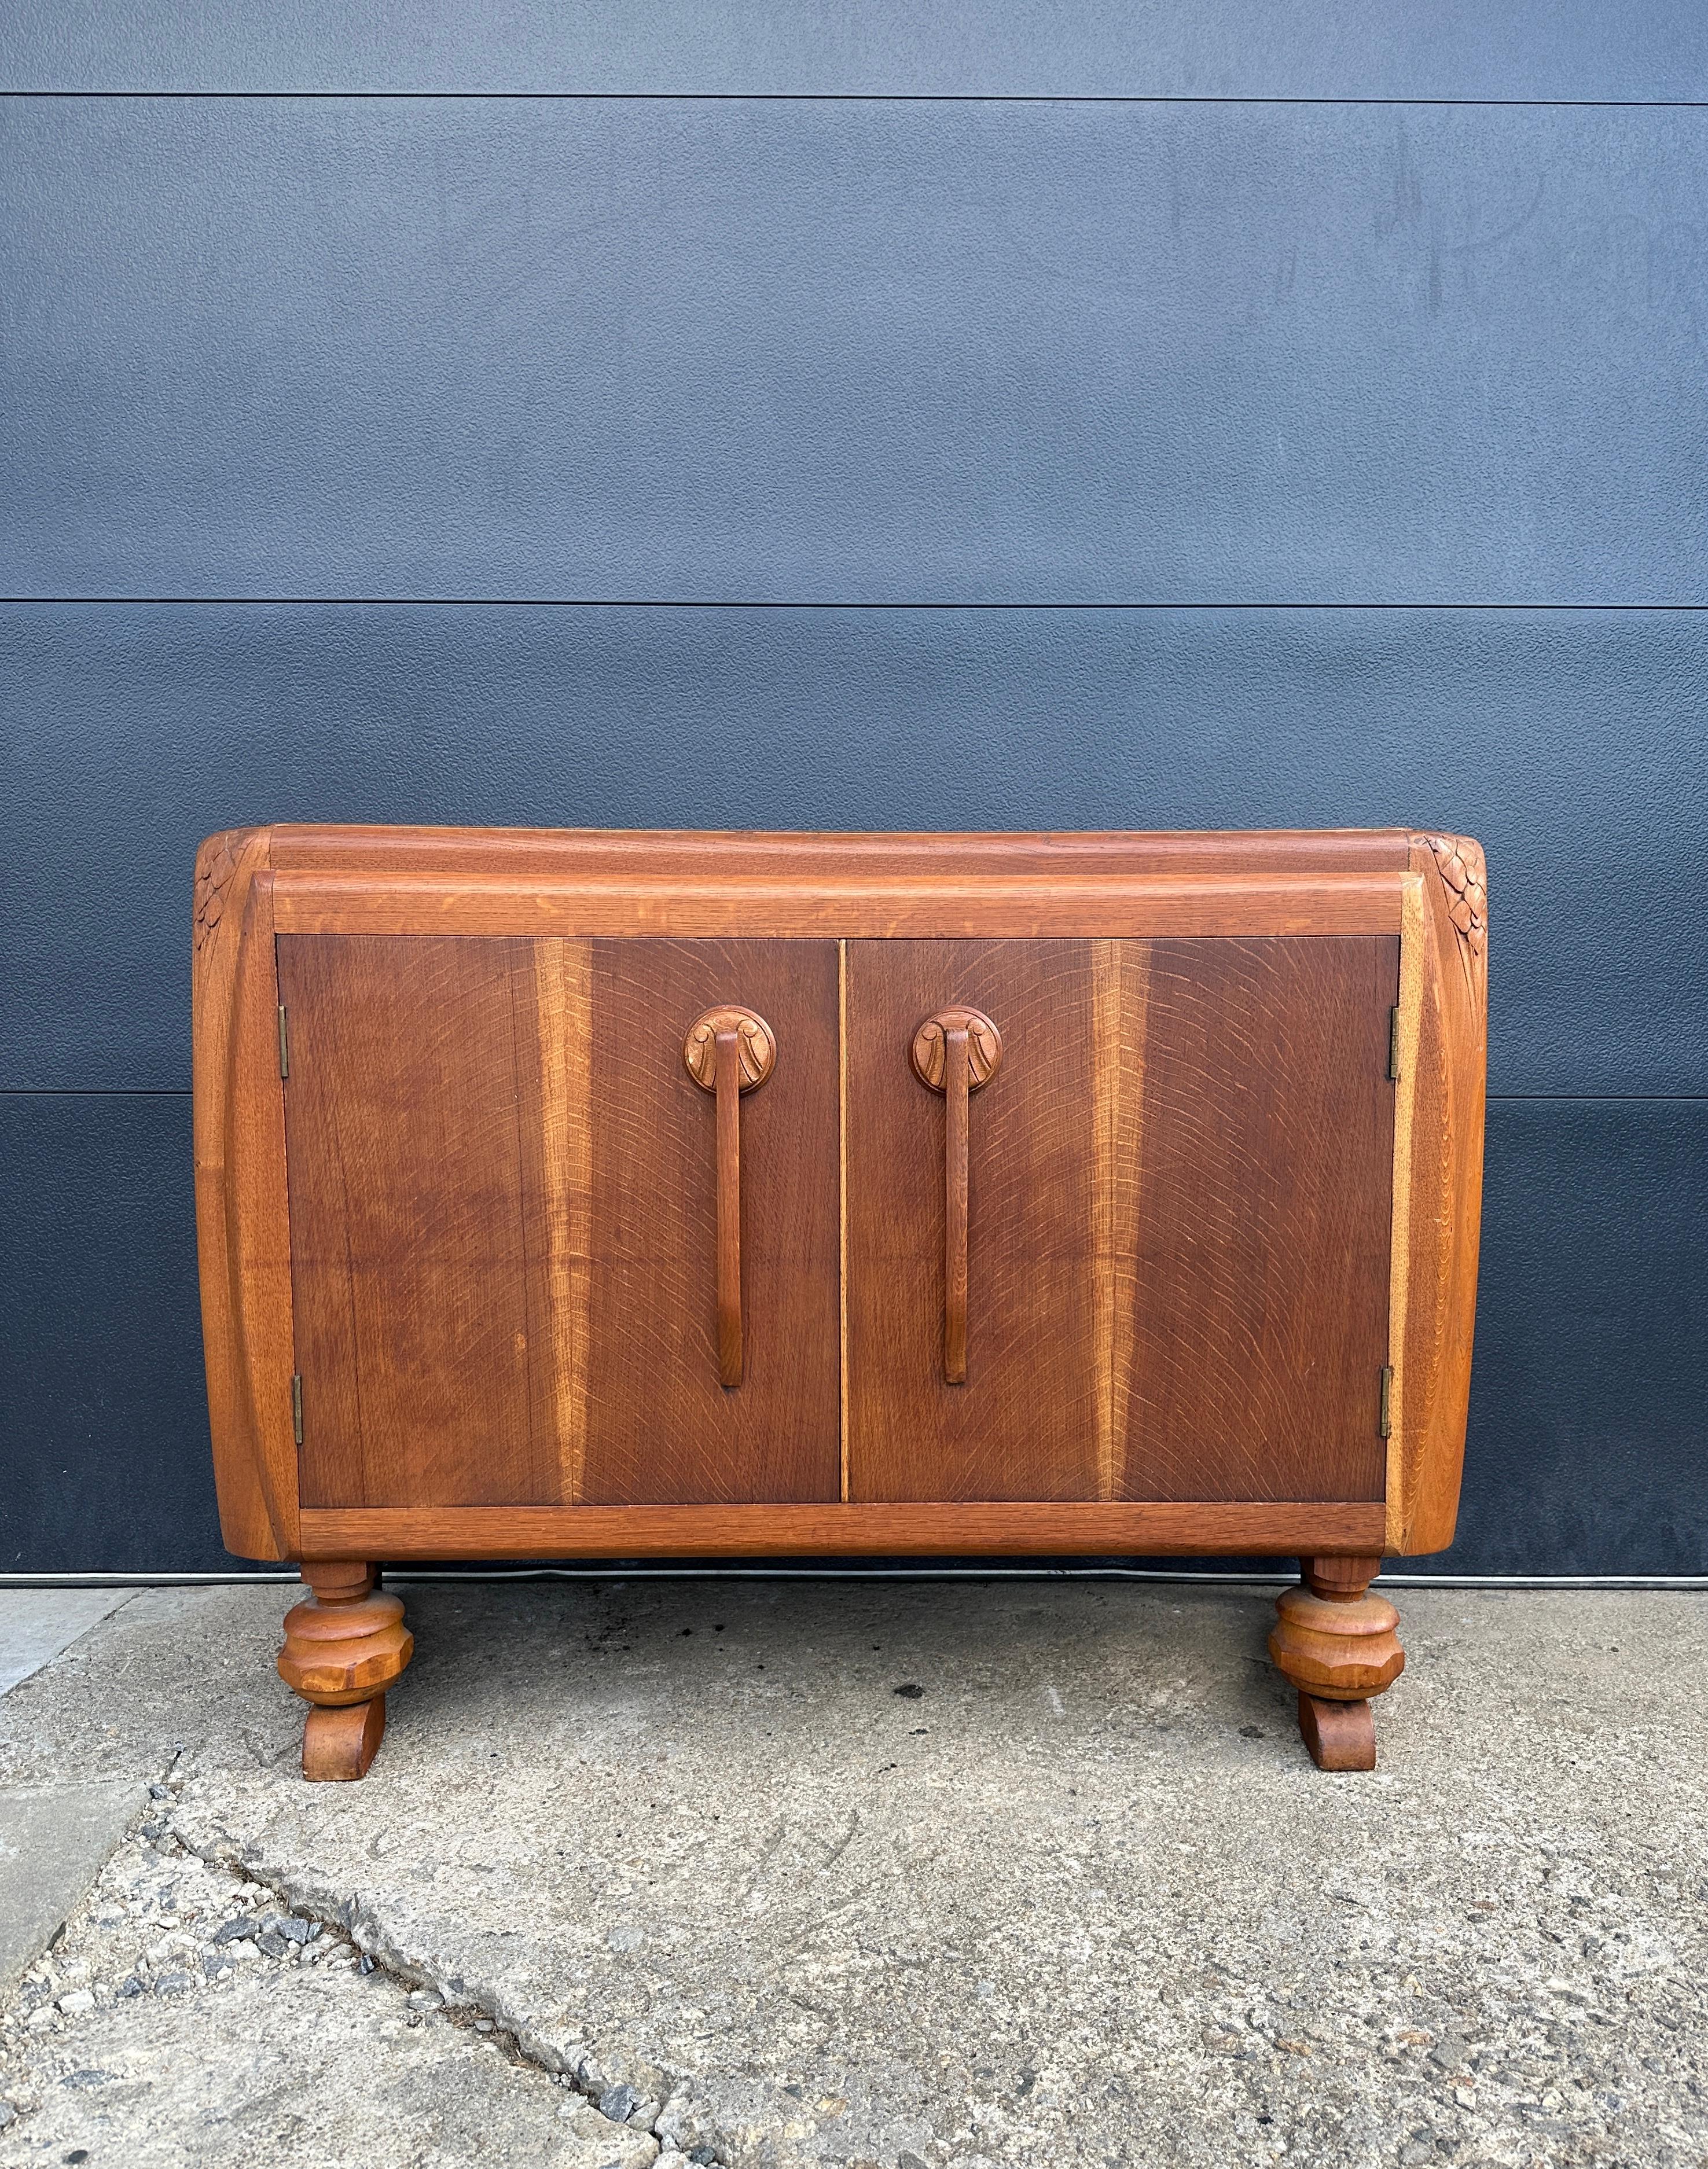 Beautifully carved ornate sideboard buffet from late 1920s, solid oak construction and details on the corners and wood handles. Piece includes 2 drawers.

Some cleaning needed, minor scratches on surface from age and use, but in great